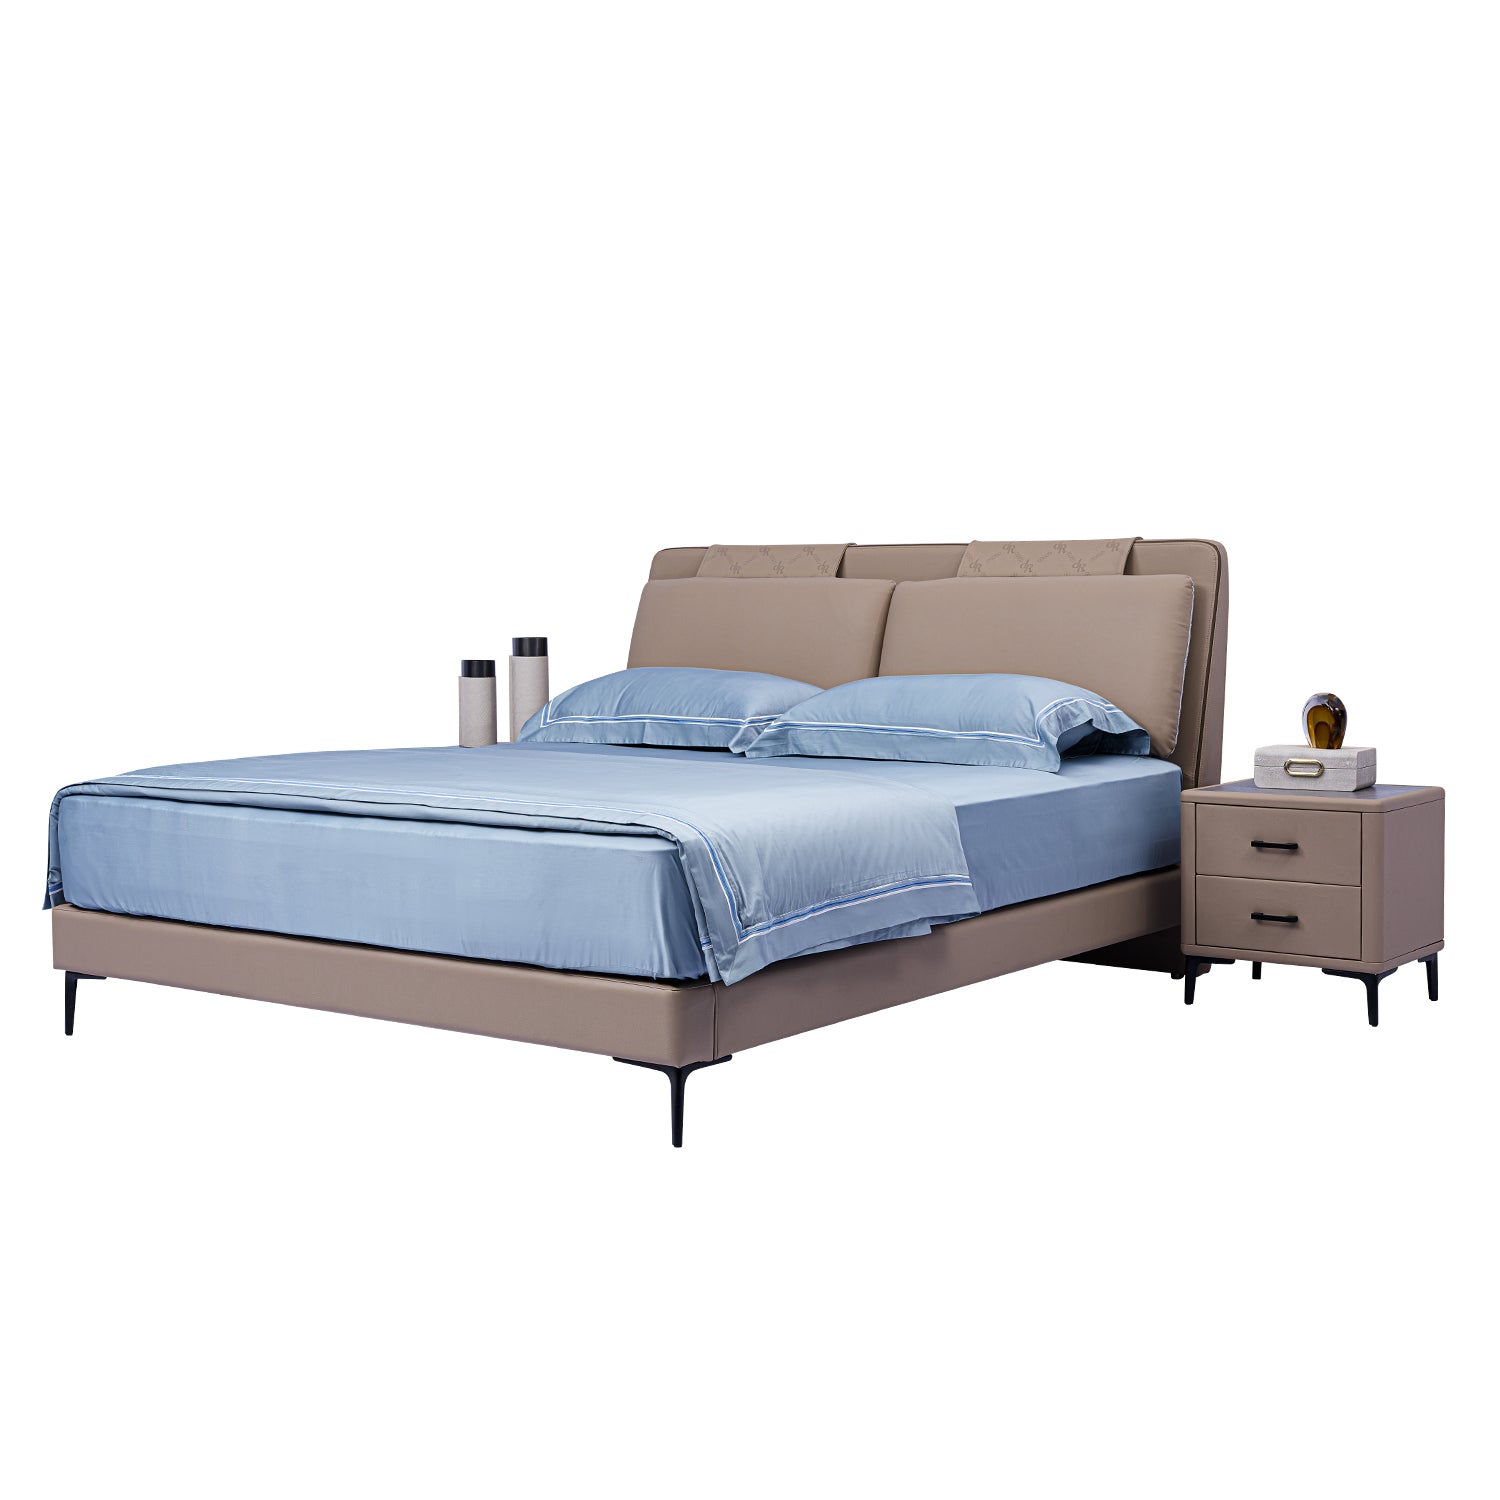 DeRUCCI Bed Frame BOC1 - 006 with beige fabric upholstery and cushioned headboard, blue bedsheets and pillows, and a matching nightstand with two drawers, metallic thermoses, and a small clock.